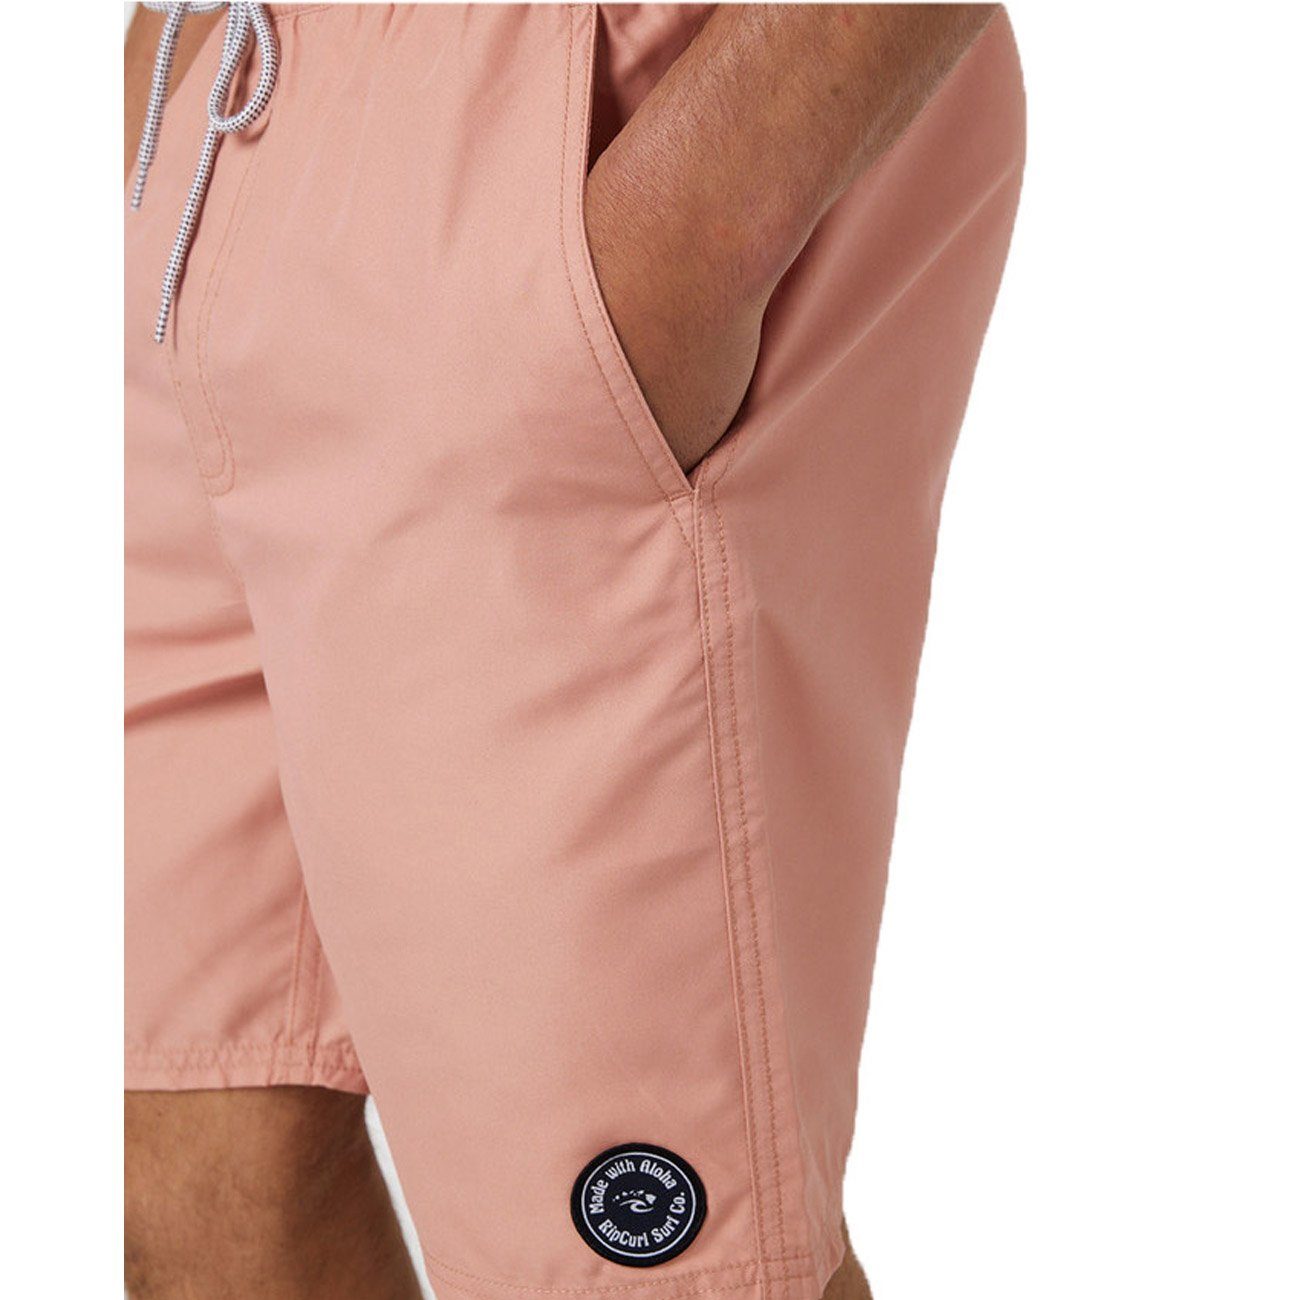 Rip Curl dusty VOLLEY LIVING rose EASY Badeshorts